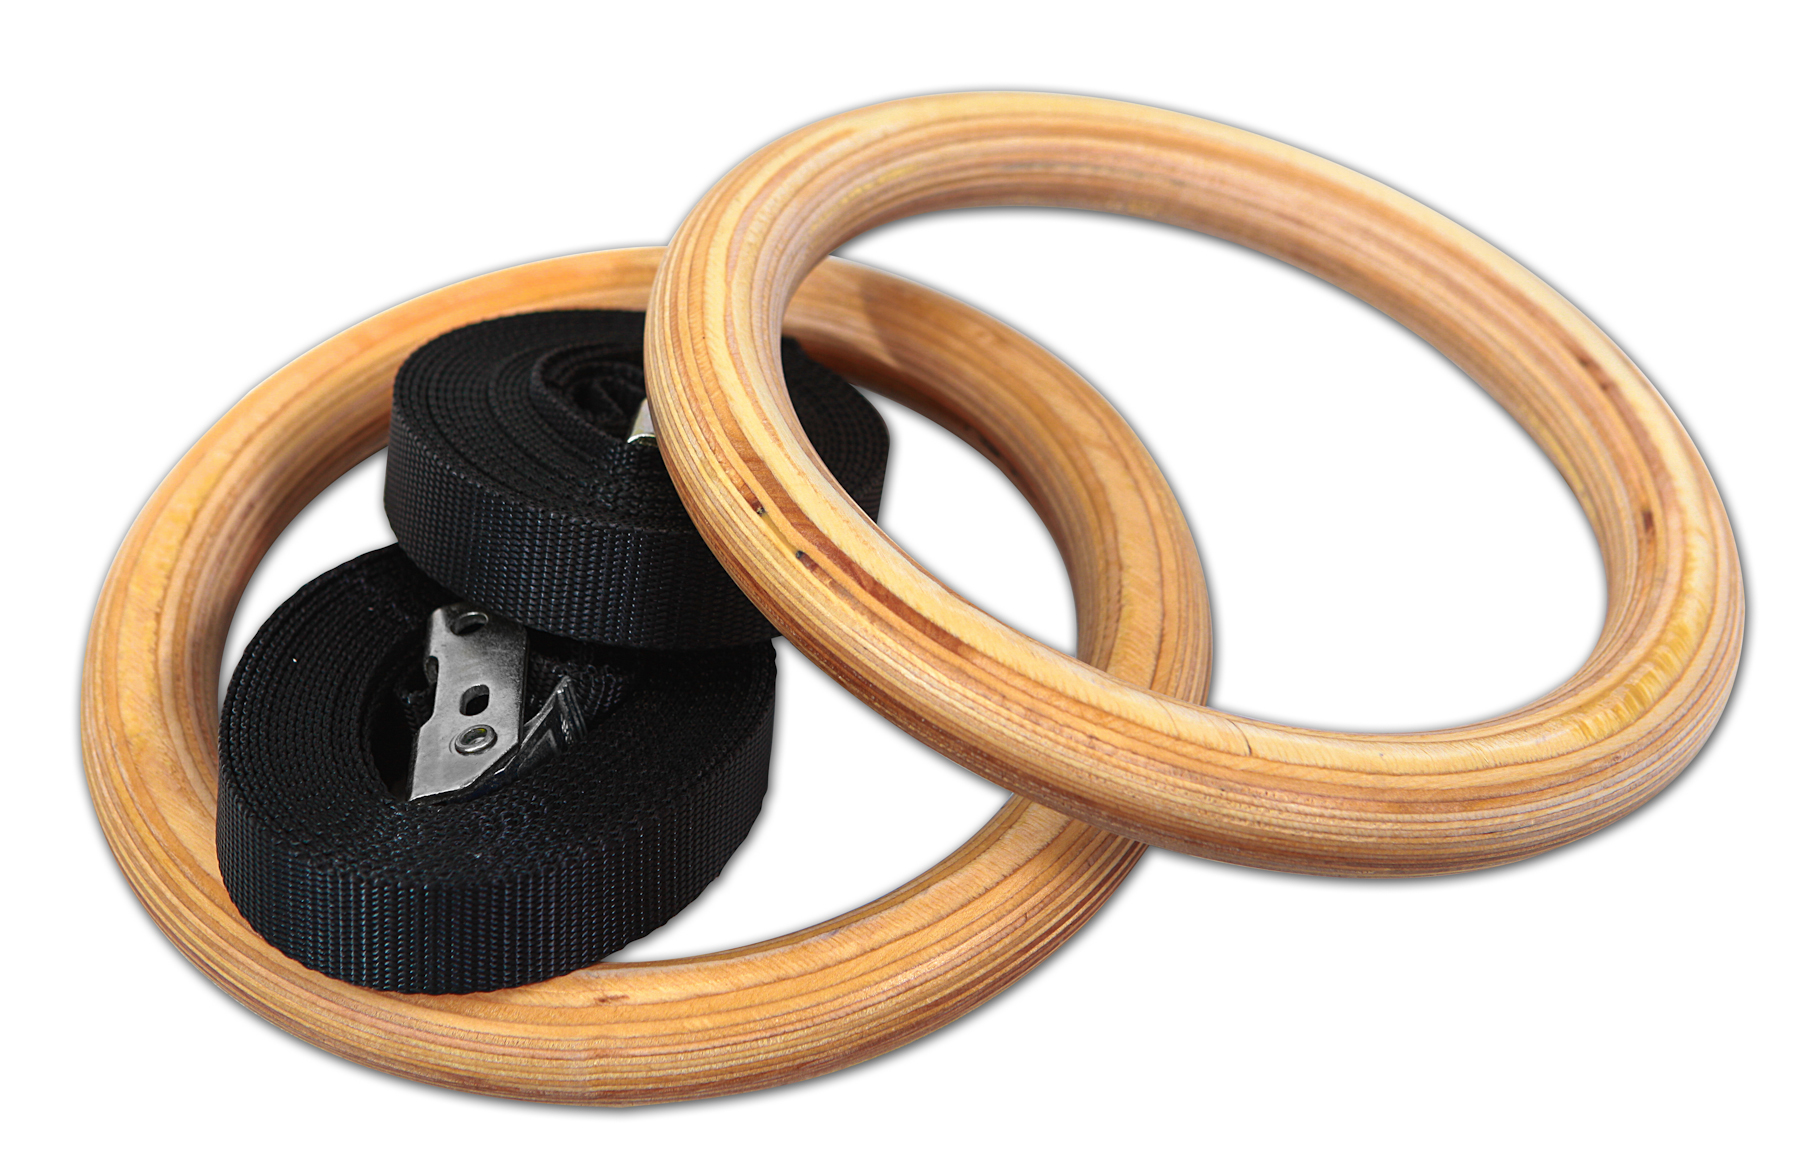 Wooden gym rings